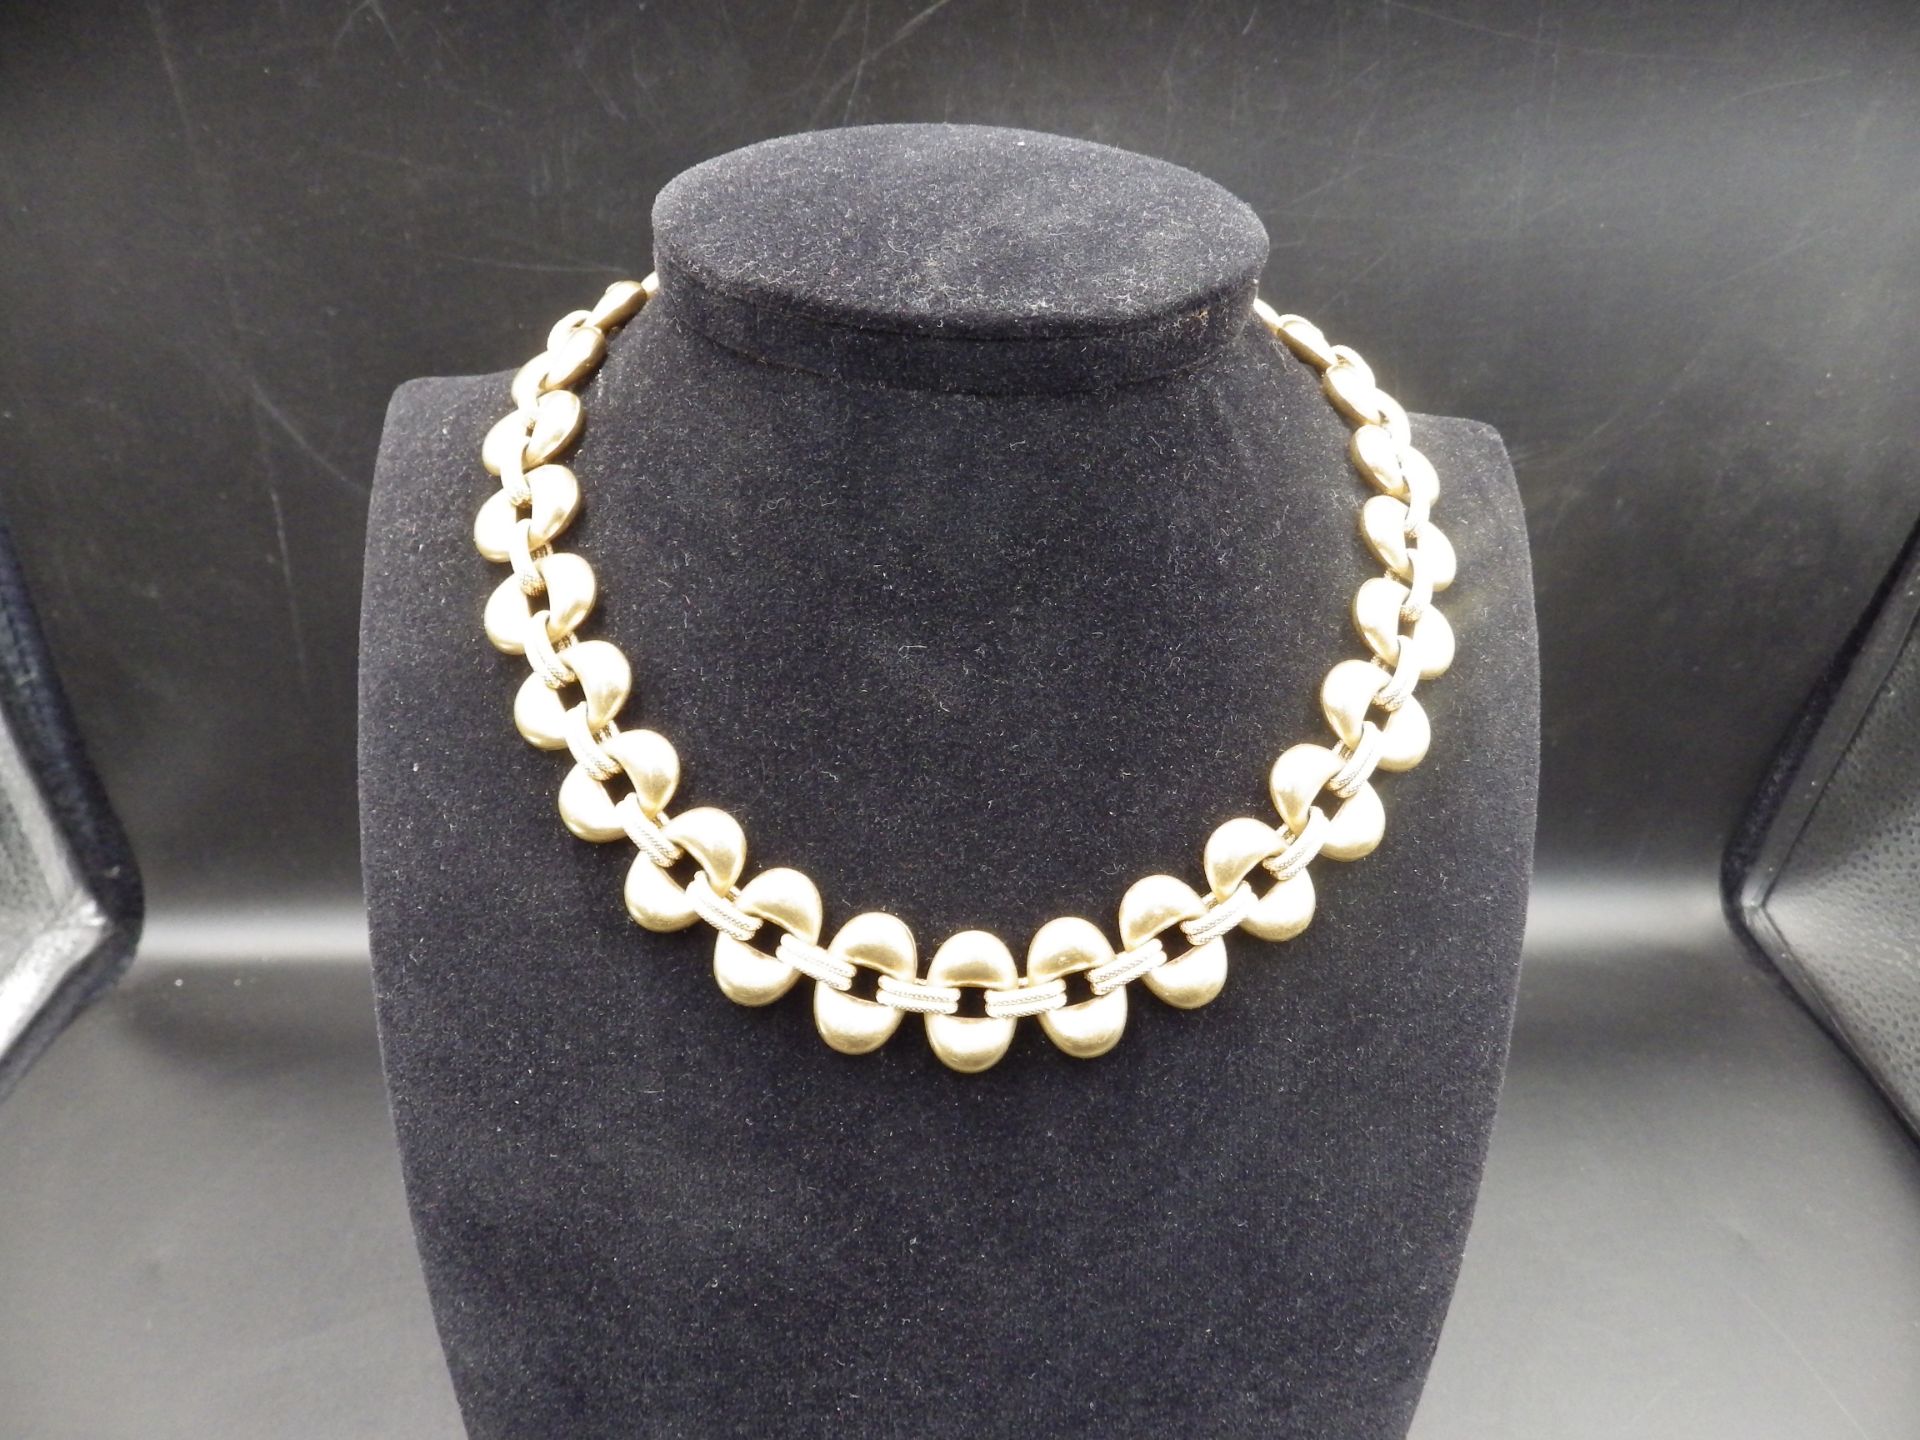 9ct Itailian gold chain by 'Unoaerre' 45cm in length and 48.60g total weight. - Image 2 of 4